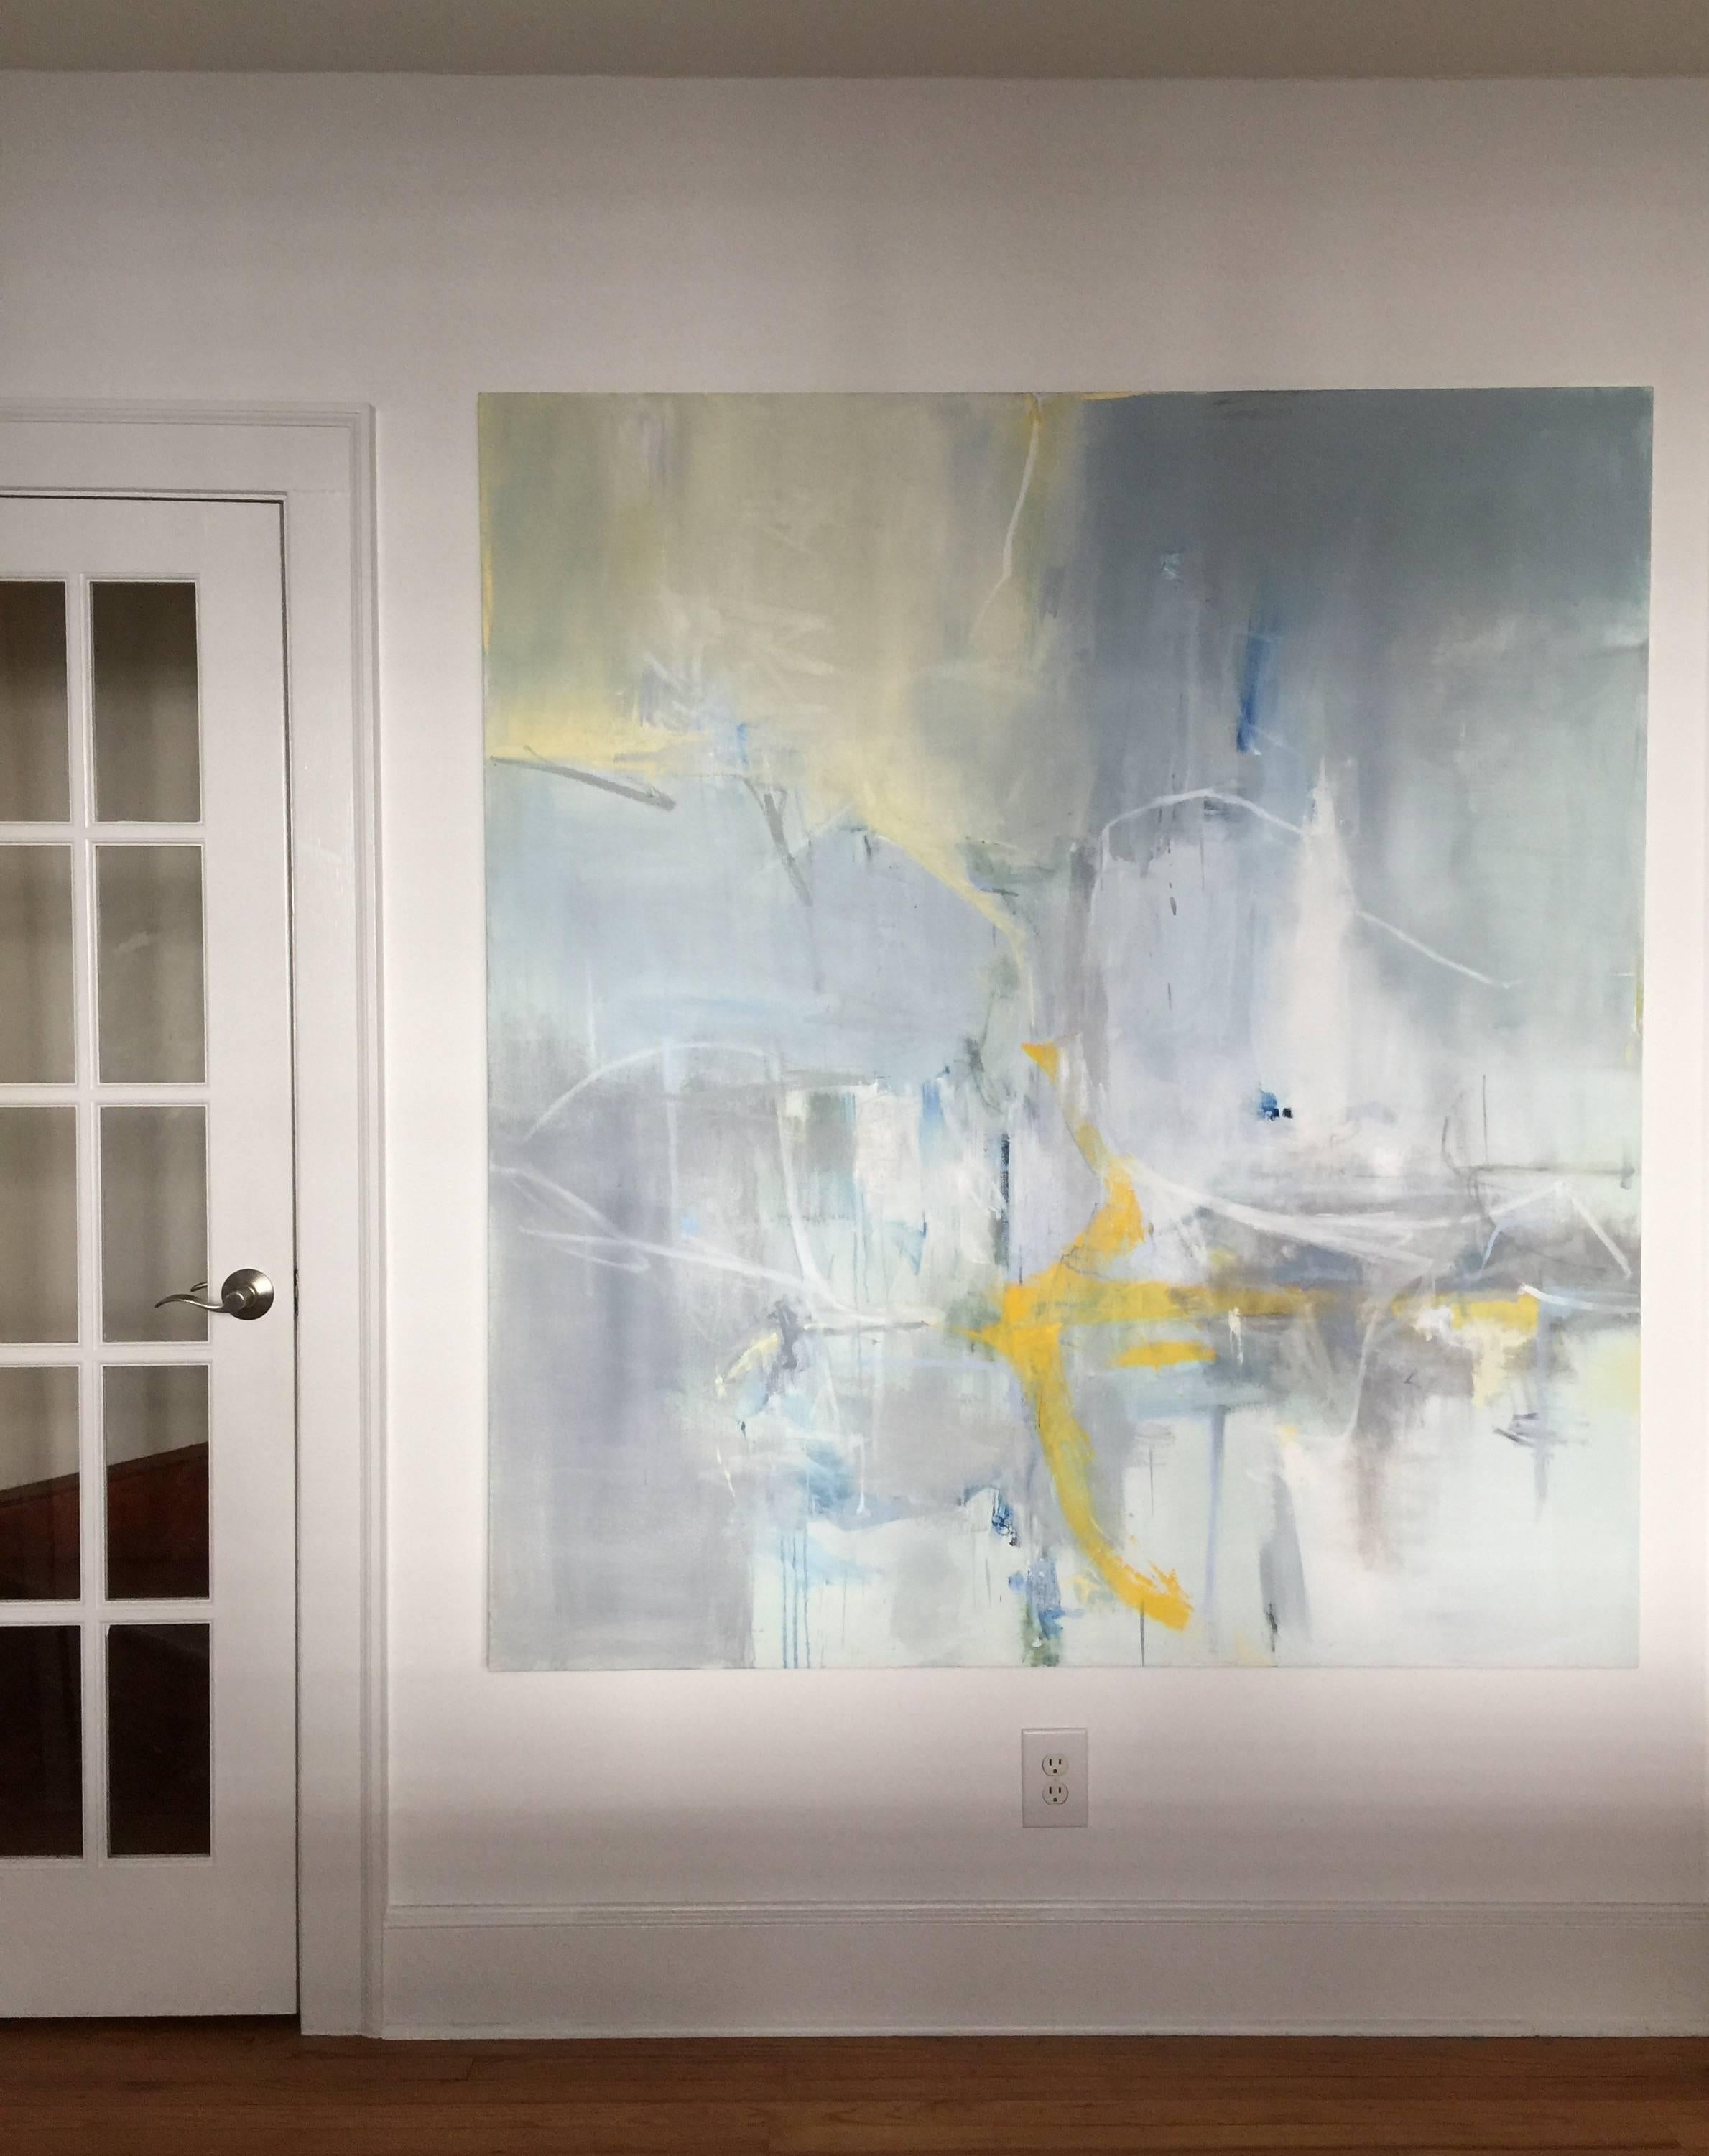 EMILIA DUBICKI is represented by the Fred Giampietro Gallery, New Haven, CT 
My paintings are mostly abstract, but sometimes there are subtle, identifiable references to places or objects. The paintings are compilations of memories, emotions and